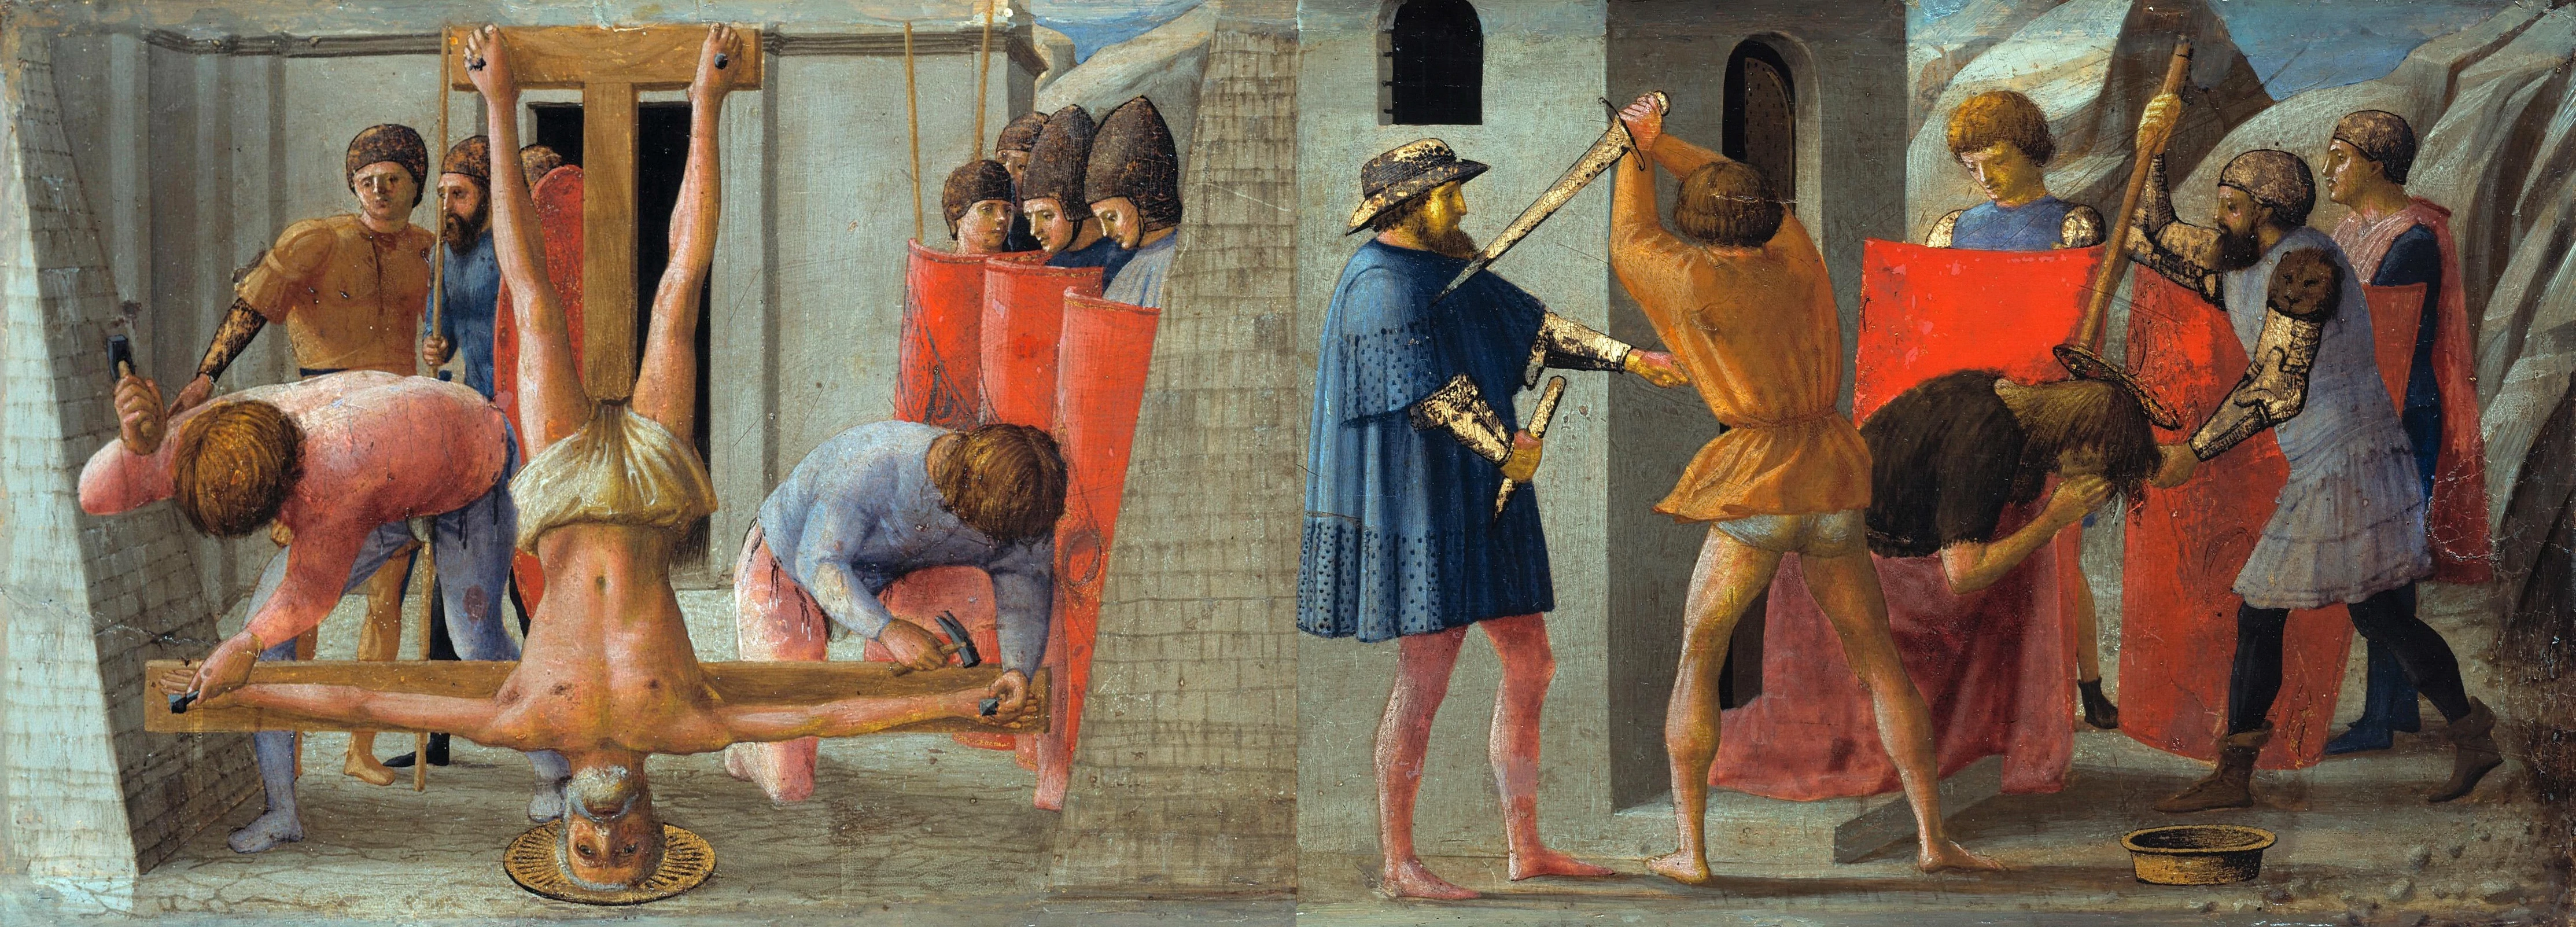 Crucifixion of St. Peter and Beheading of St. John the Baptist, Masaccio